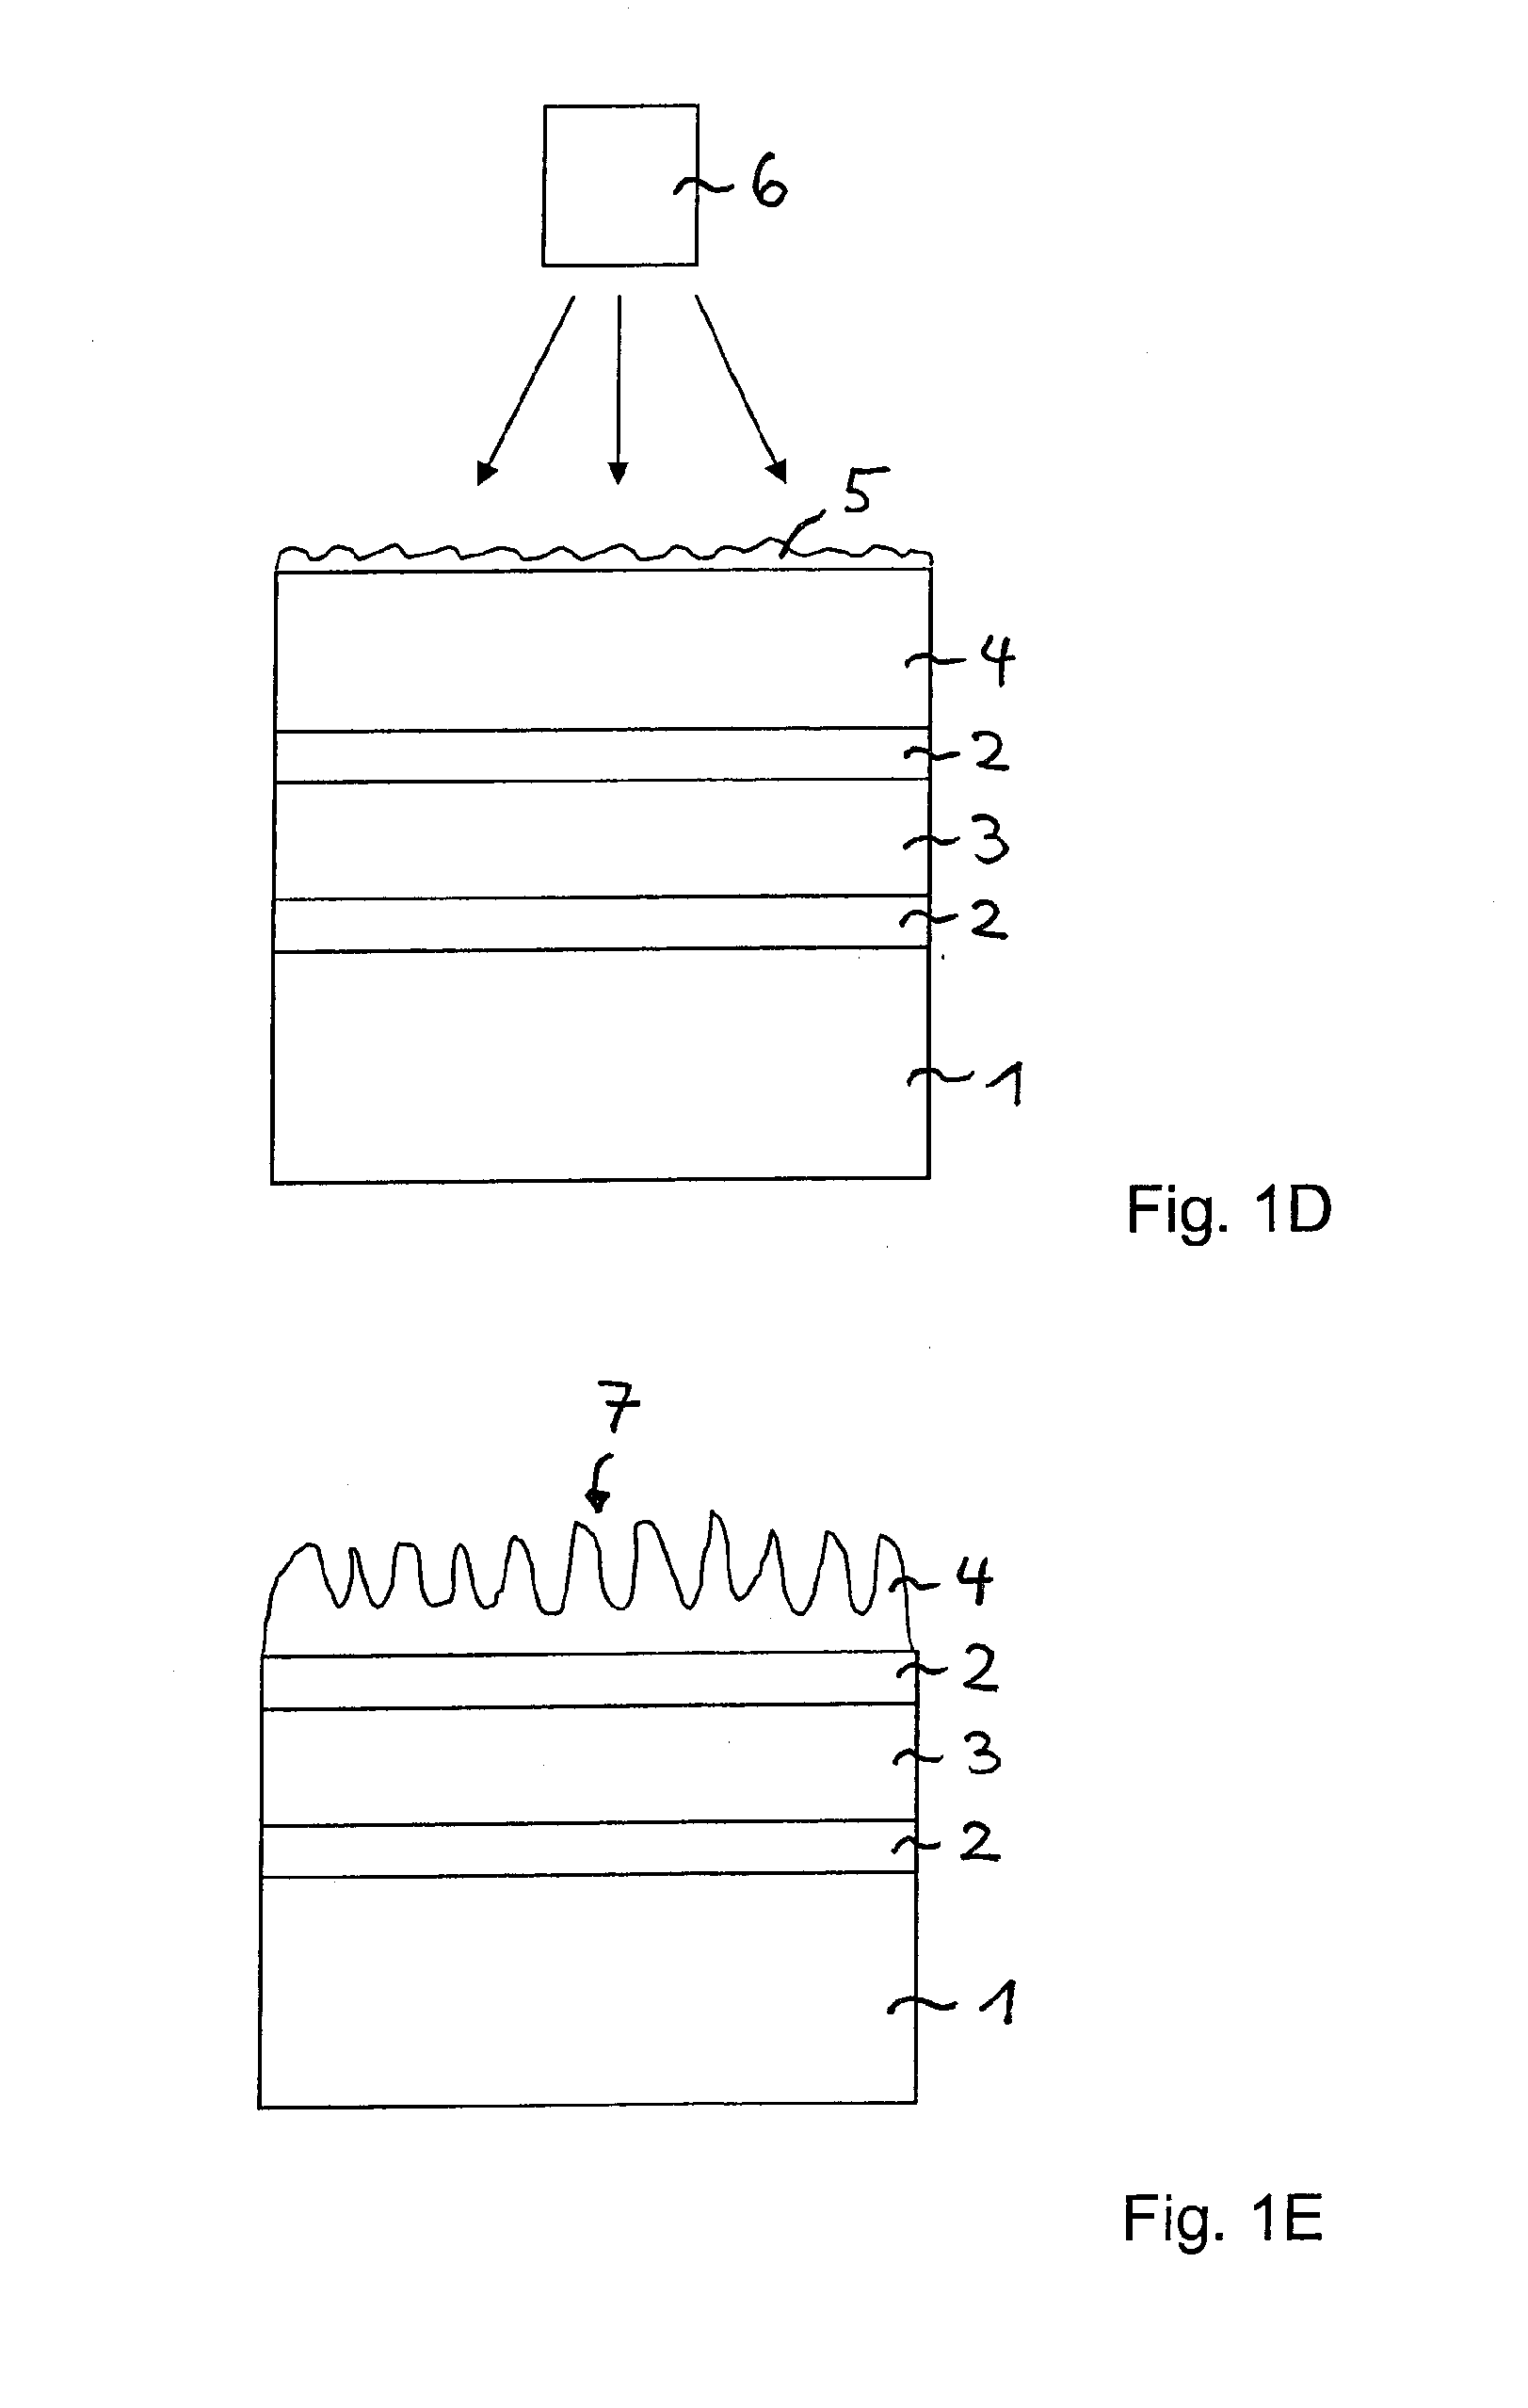 Reflection-Reducing Interference Layer System and Method for Producing It